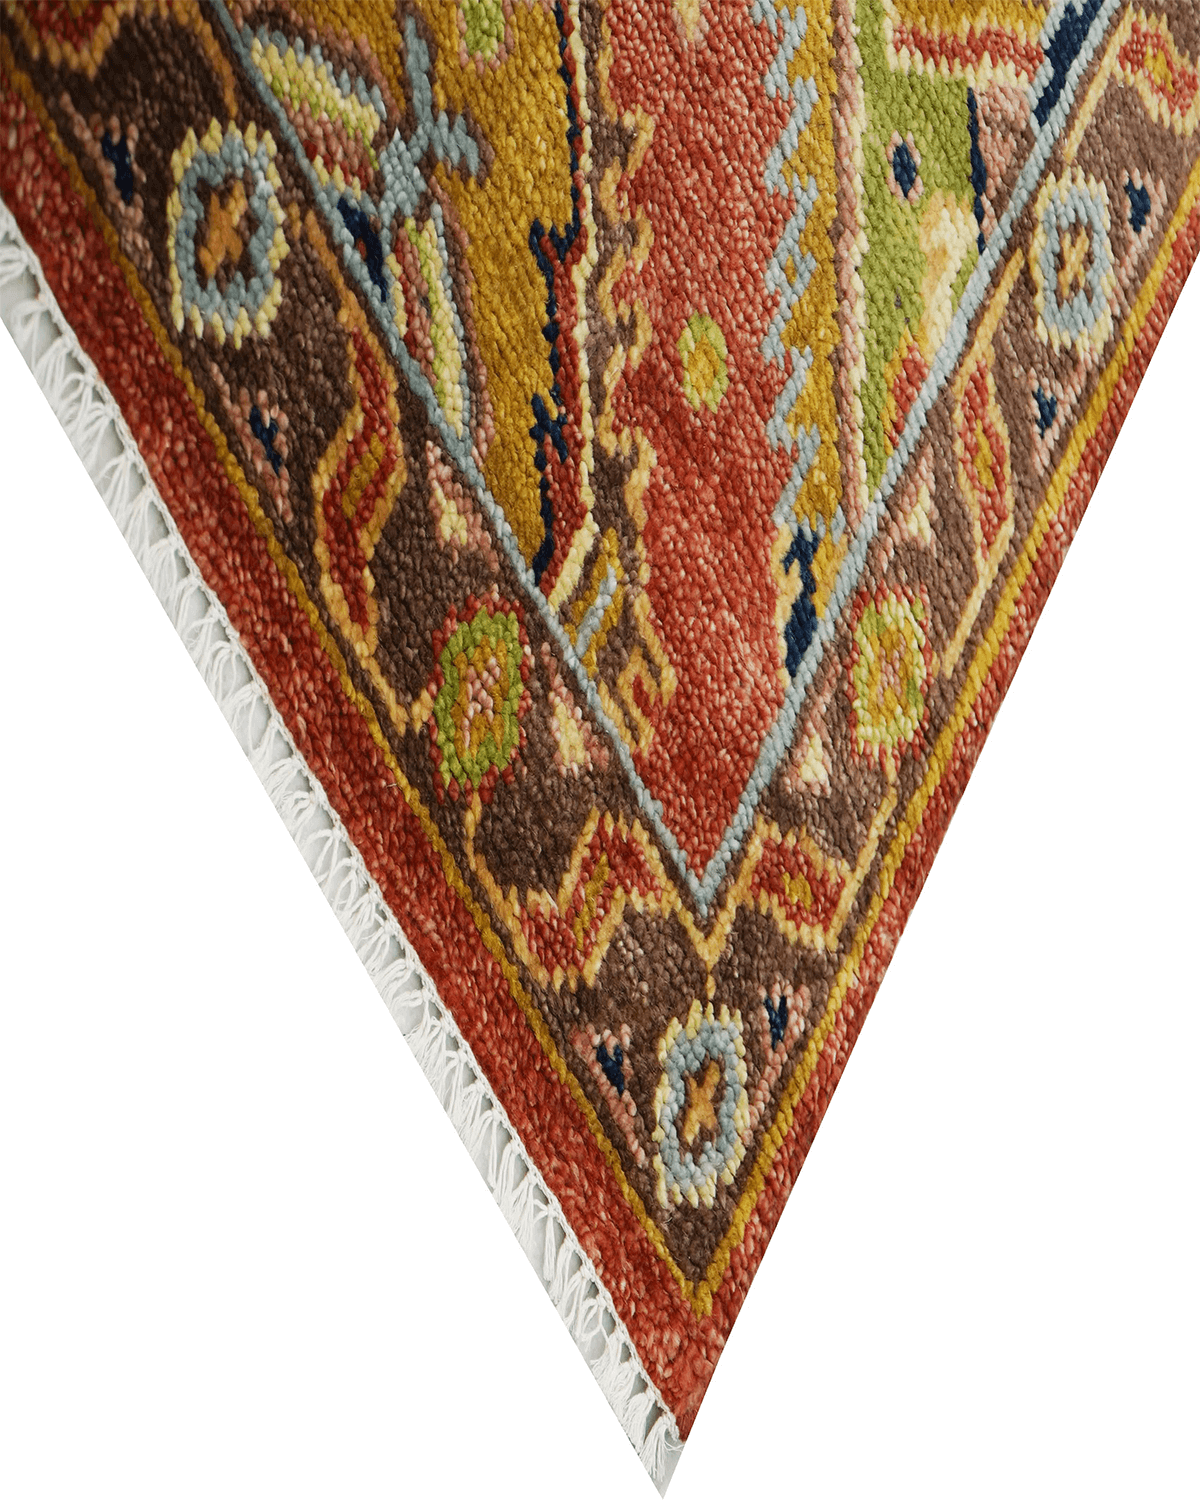 Traditional Hand-knotted Rug (A1.826)